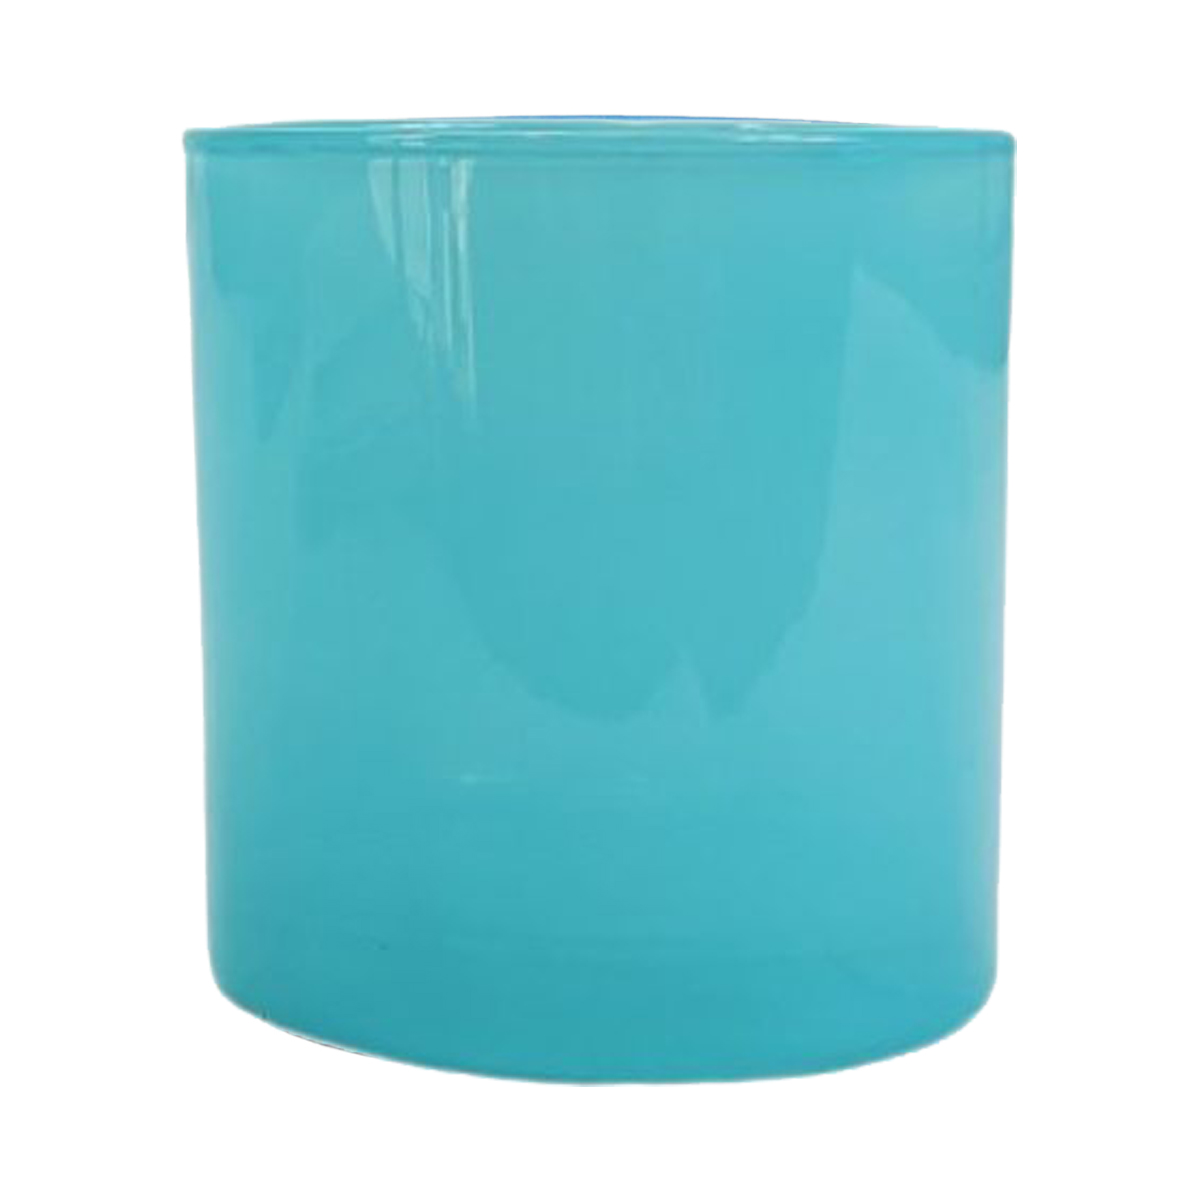 Monticiano Turquoise candle vessel